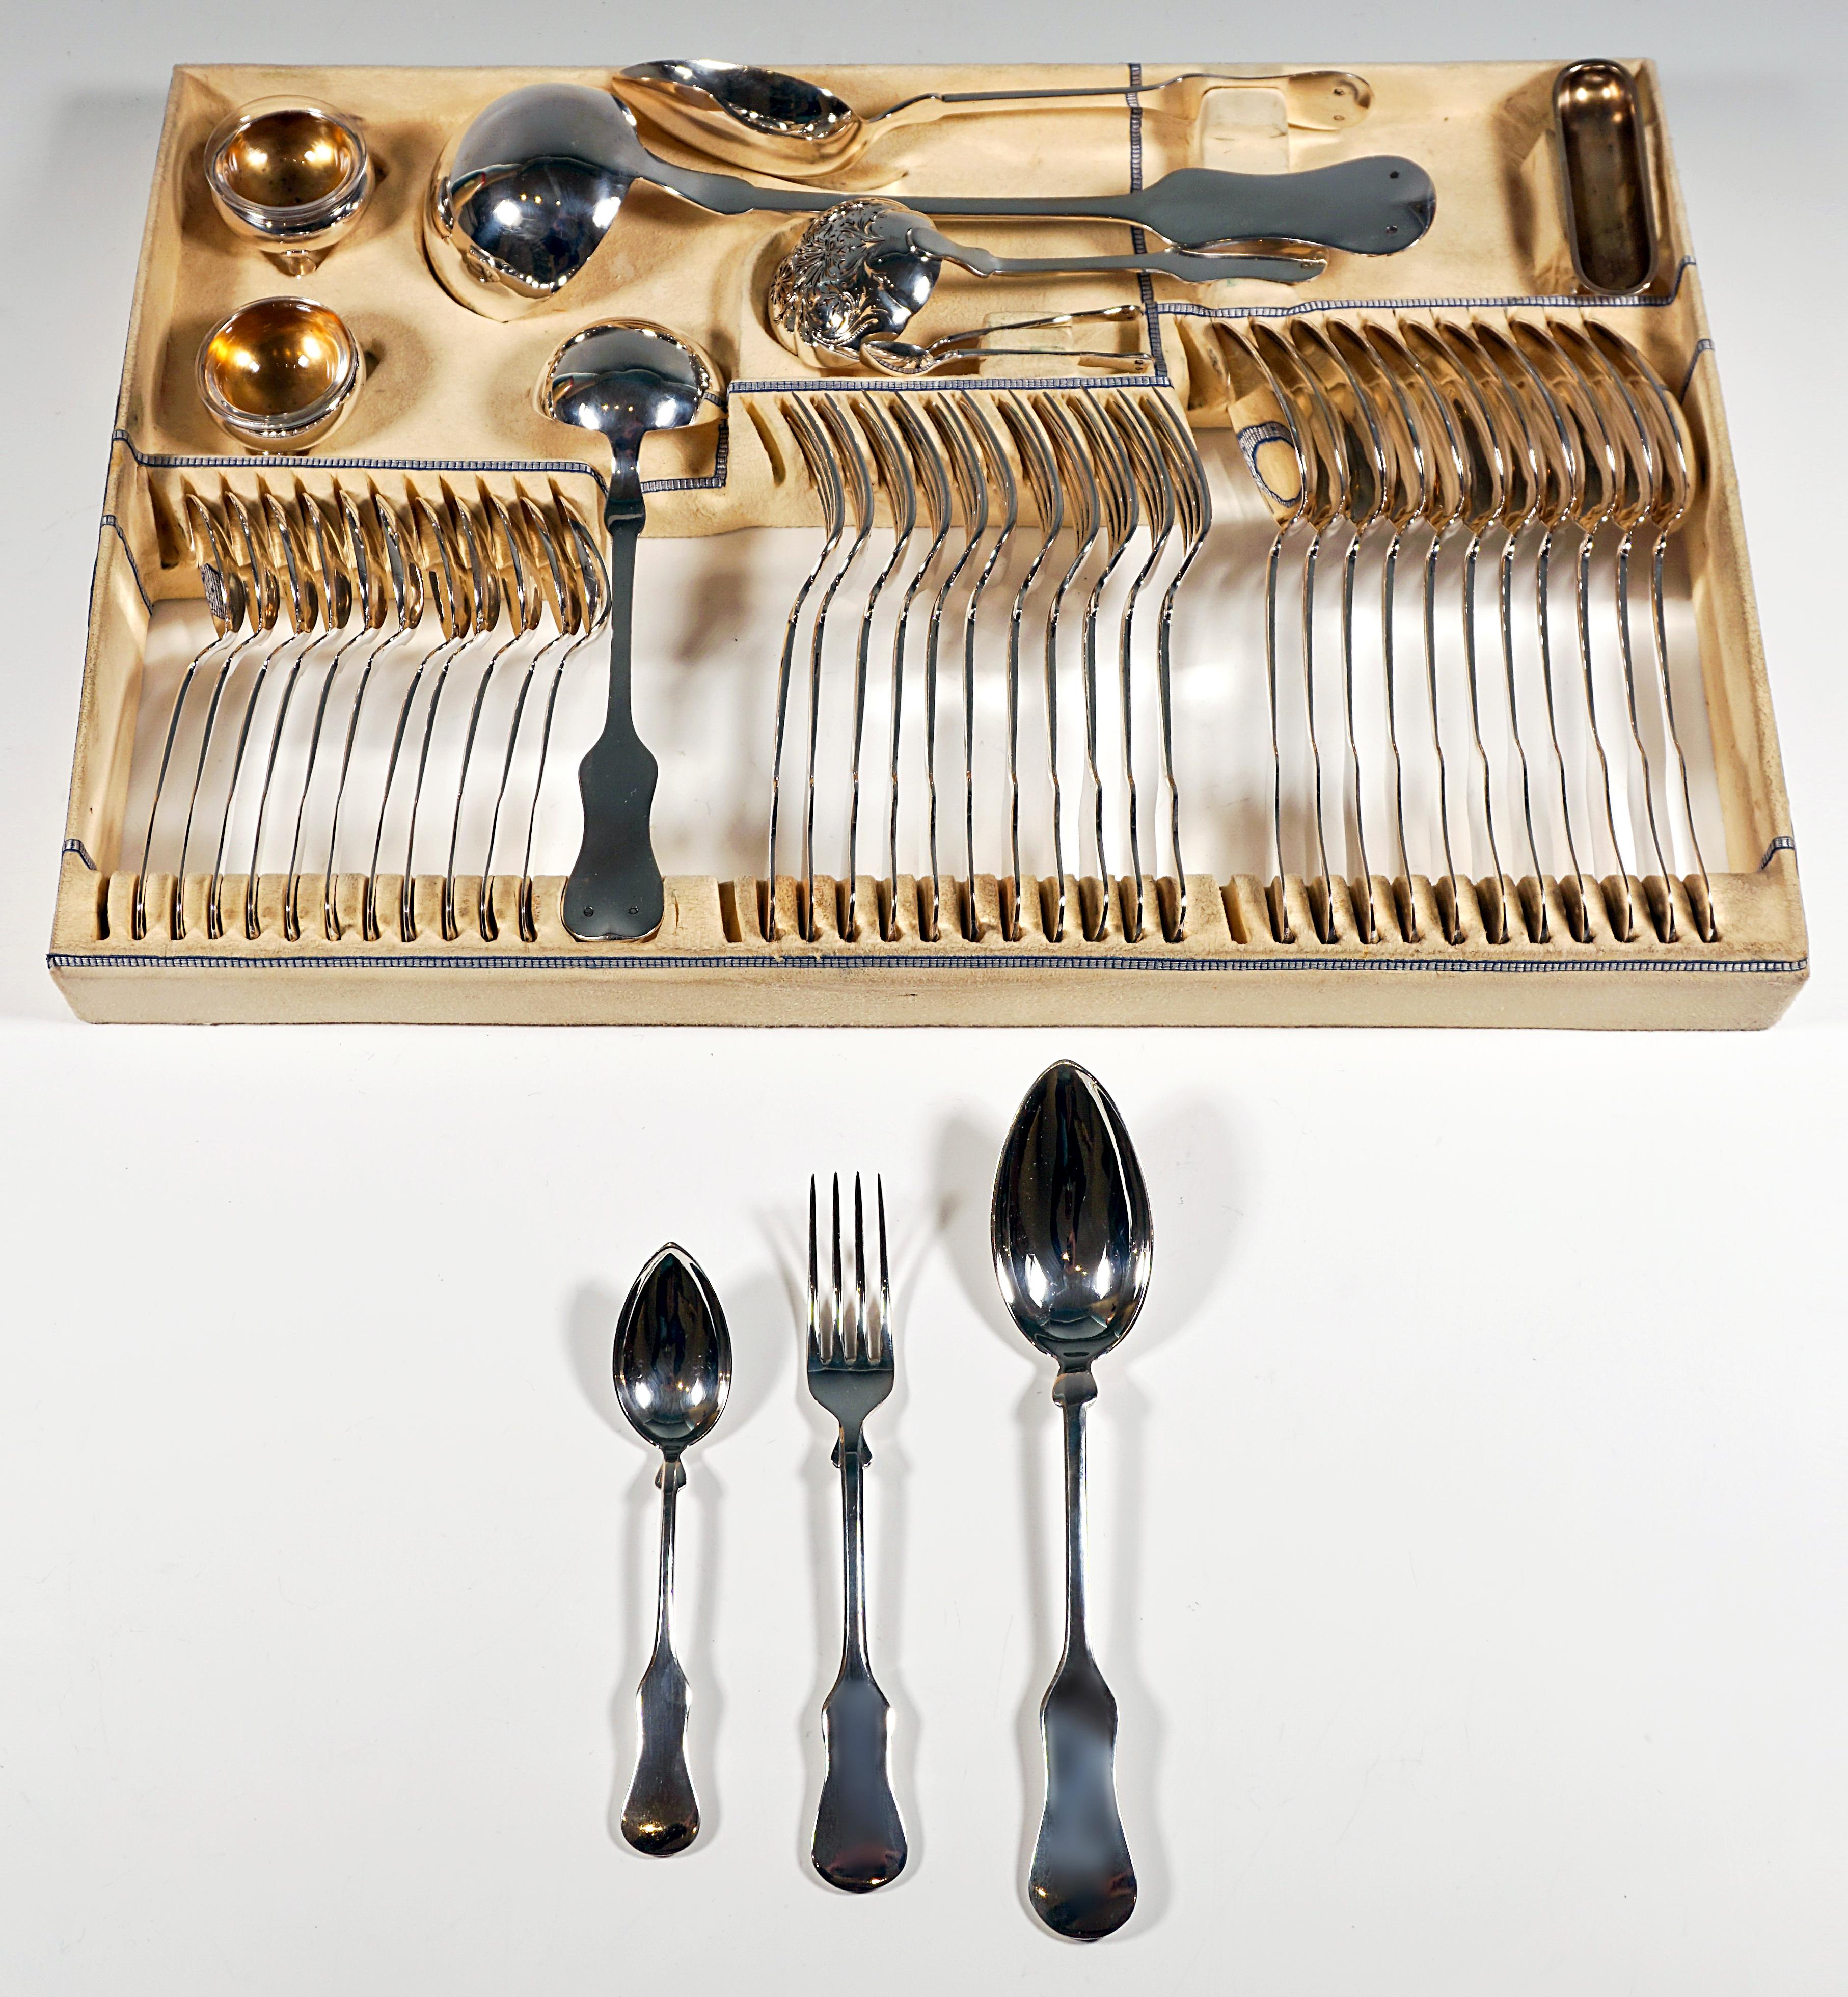 Hand-Crafted Viennese Silver Art Nouveau Cutlery Set, 12 People by Klinkosch In Original Case For Sale